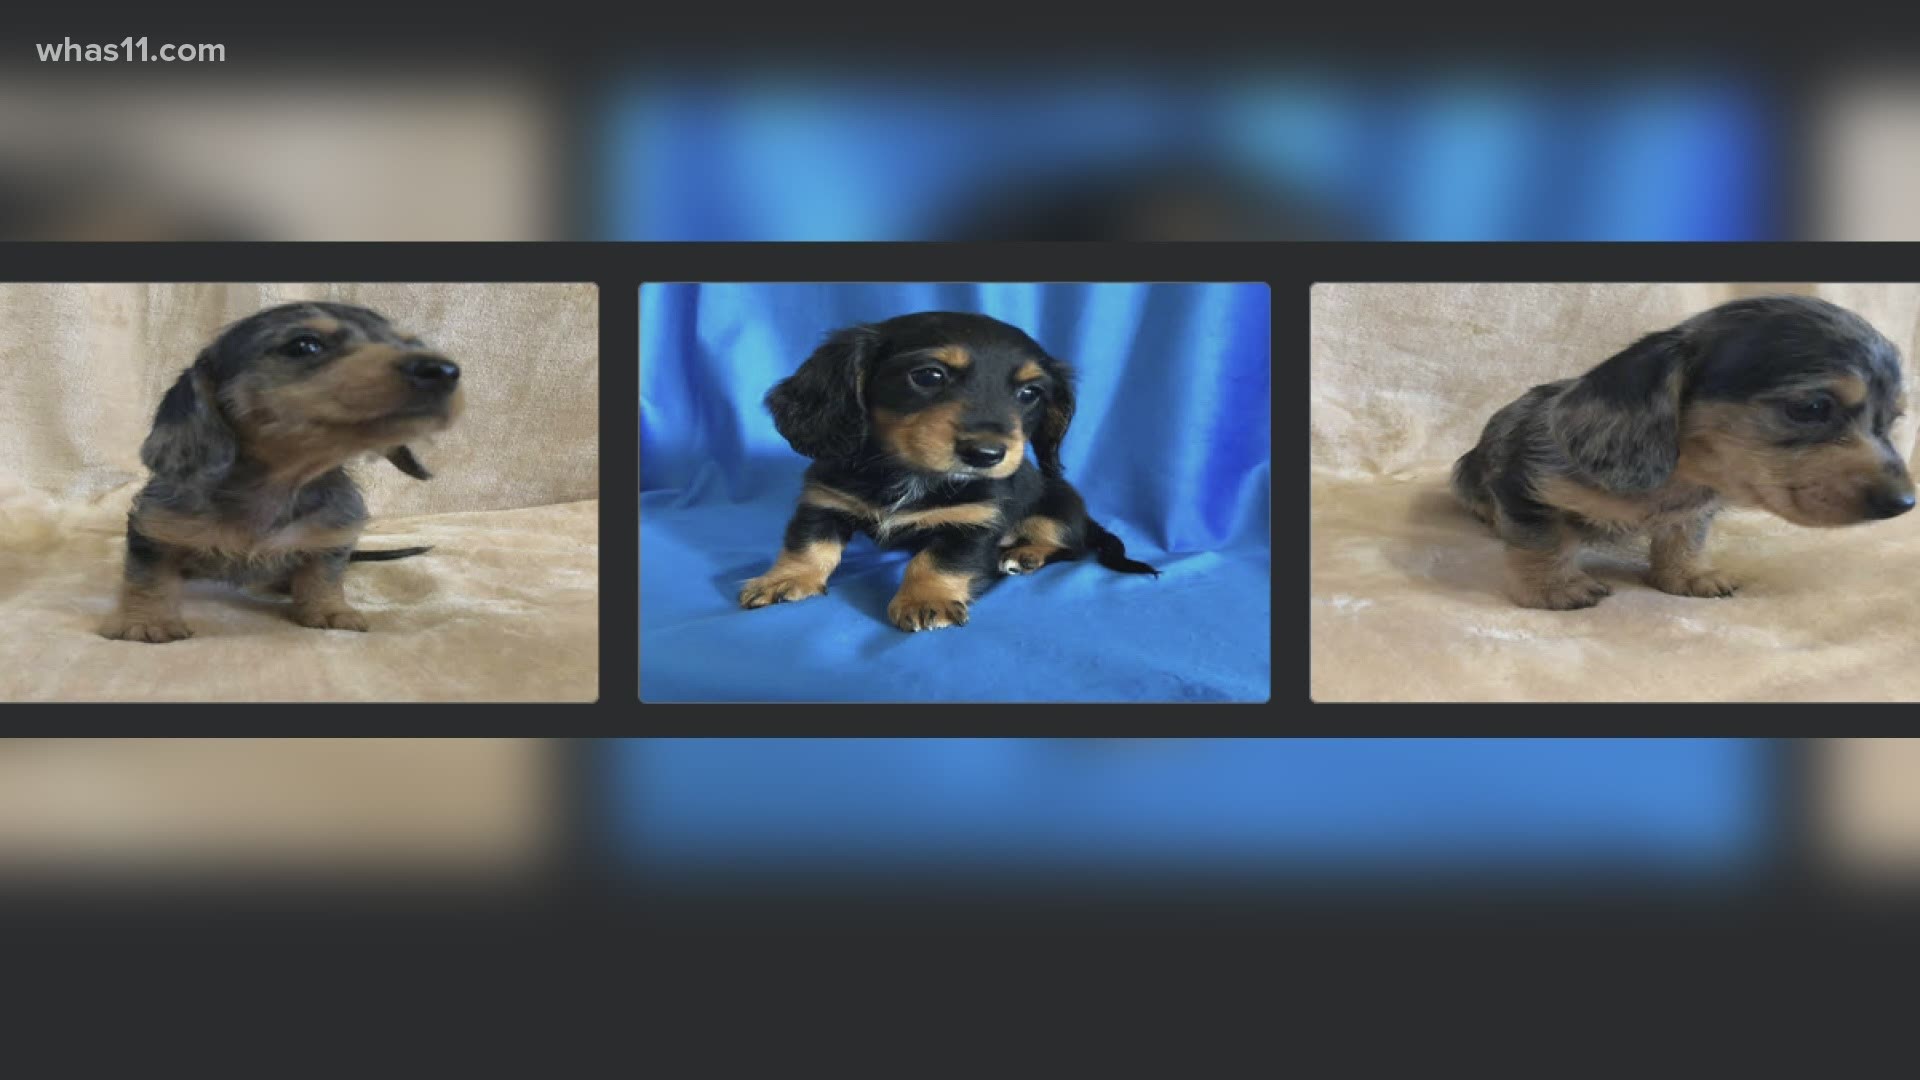 It's a crime that steals your money and a piece of your heart. Experts say puppy scams have been on the rise. Here's how you can avoid becoming a victim.